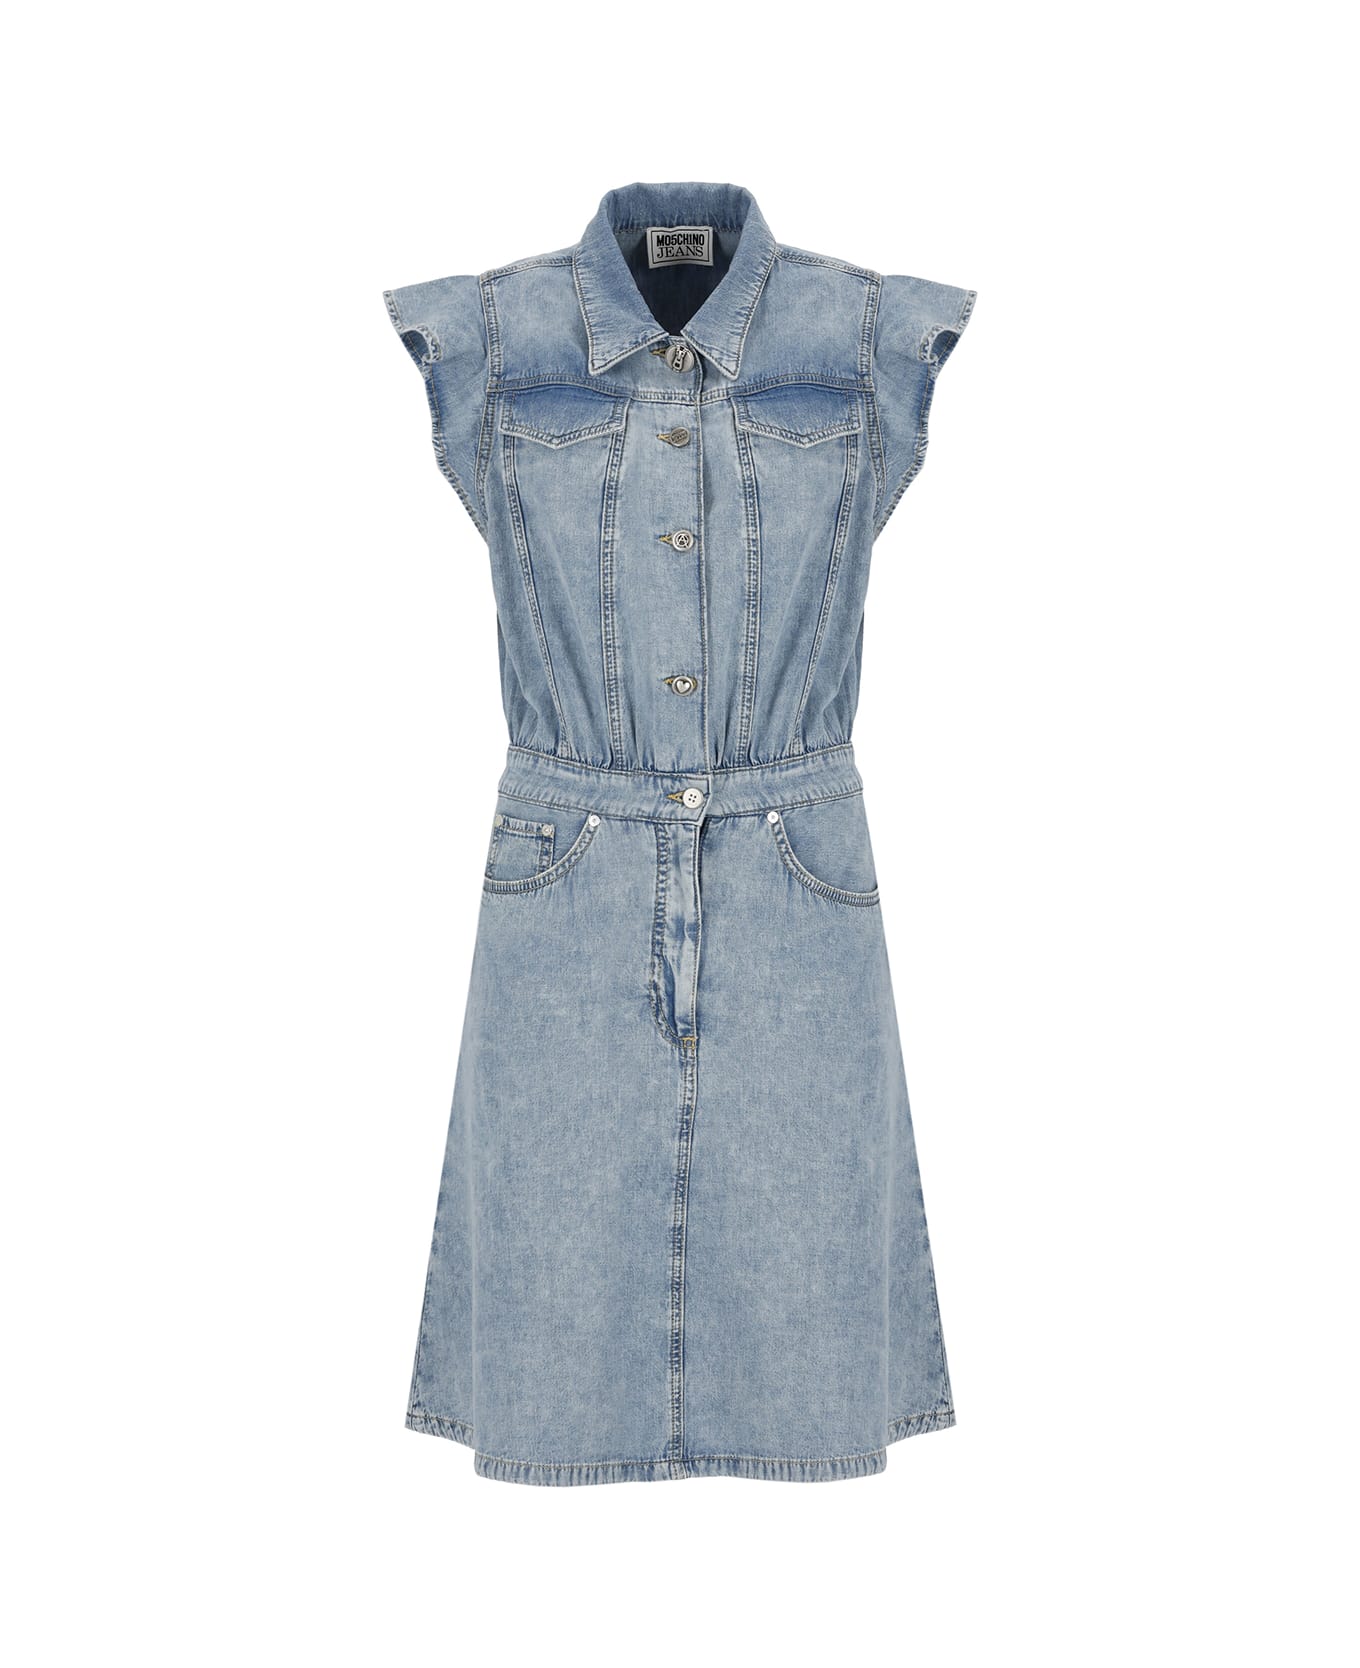 M05CH1N0 Jeans Cotton Dress - Stone Washed